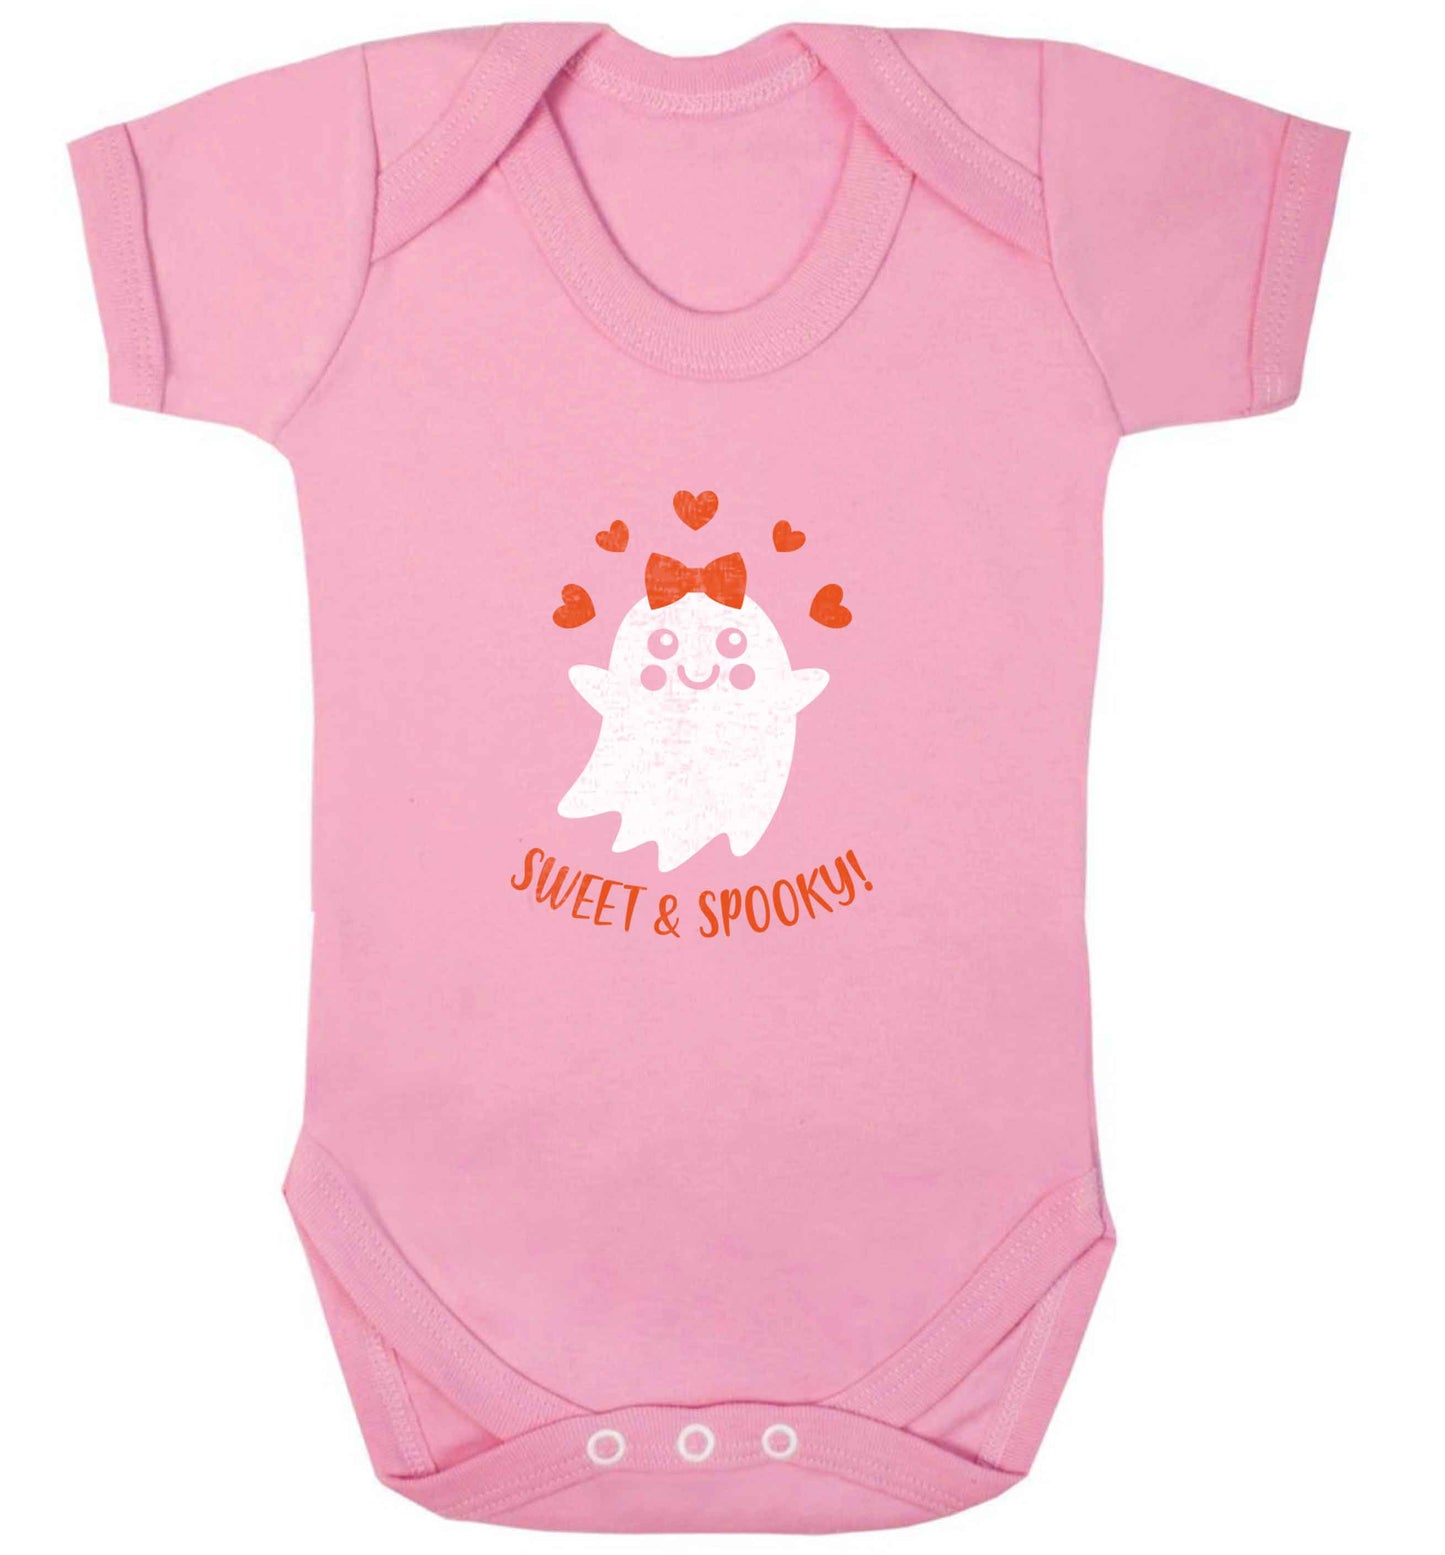 Sweet and spooky baby vest pale pink 18-24 months